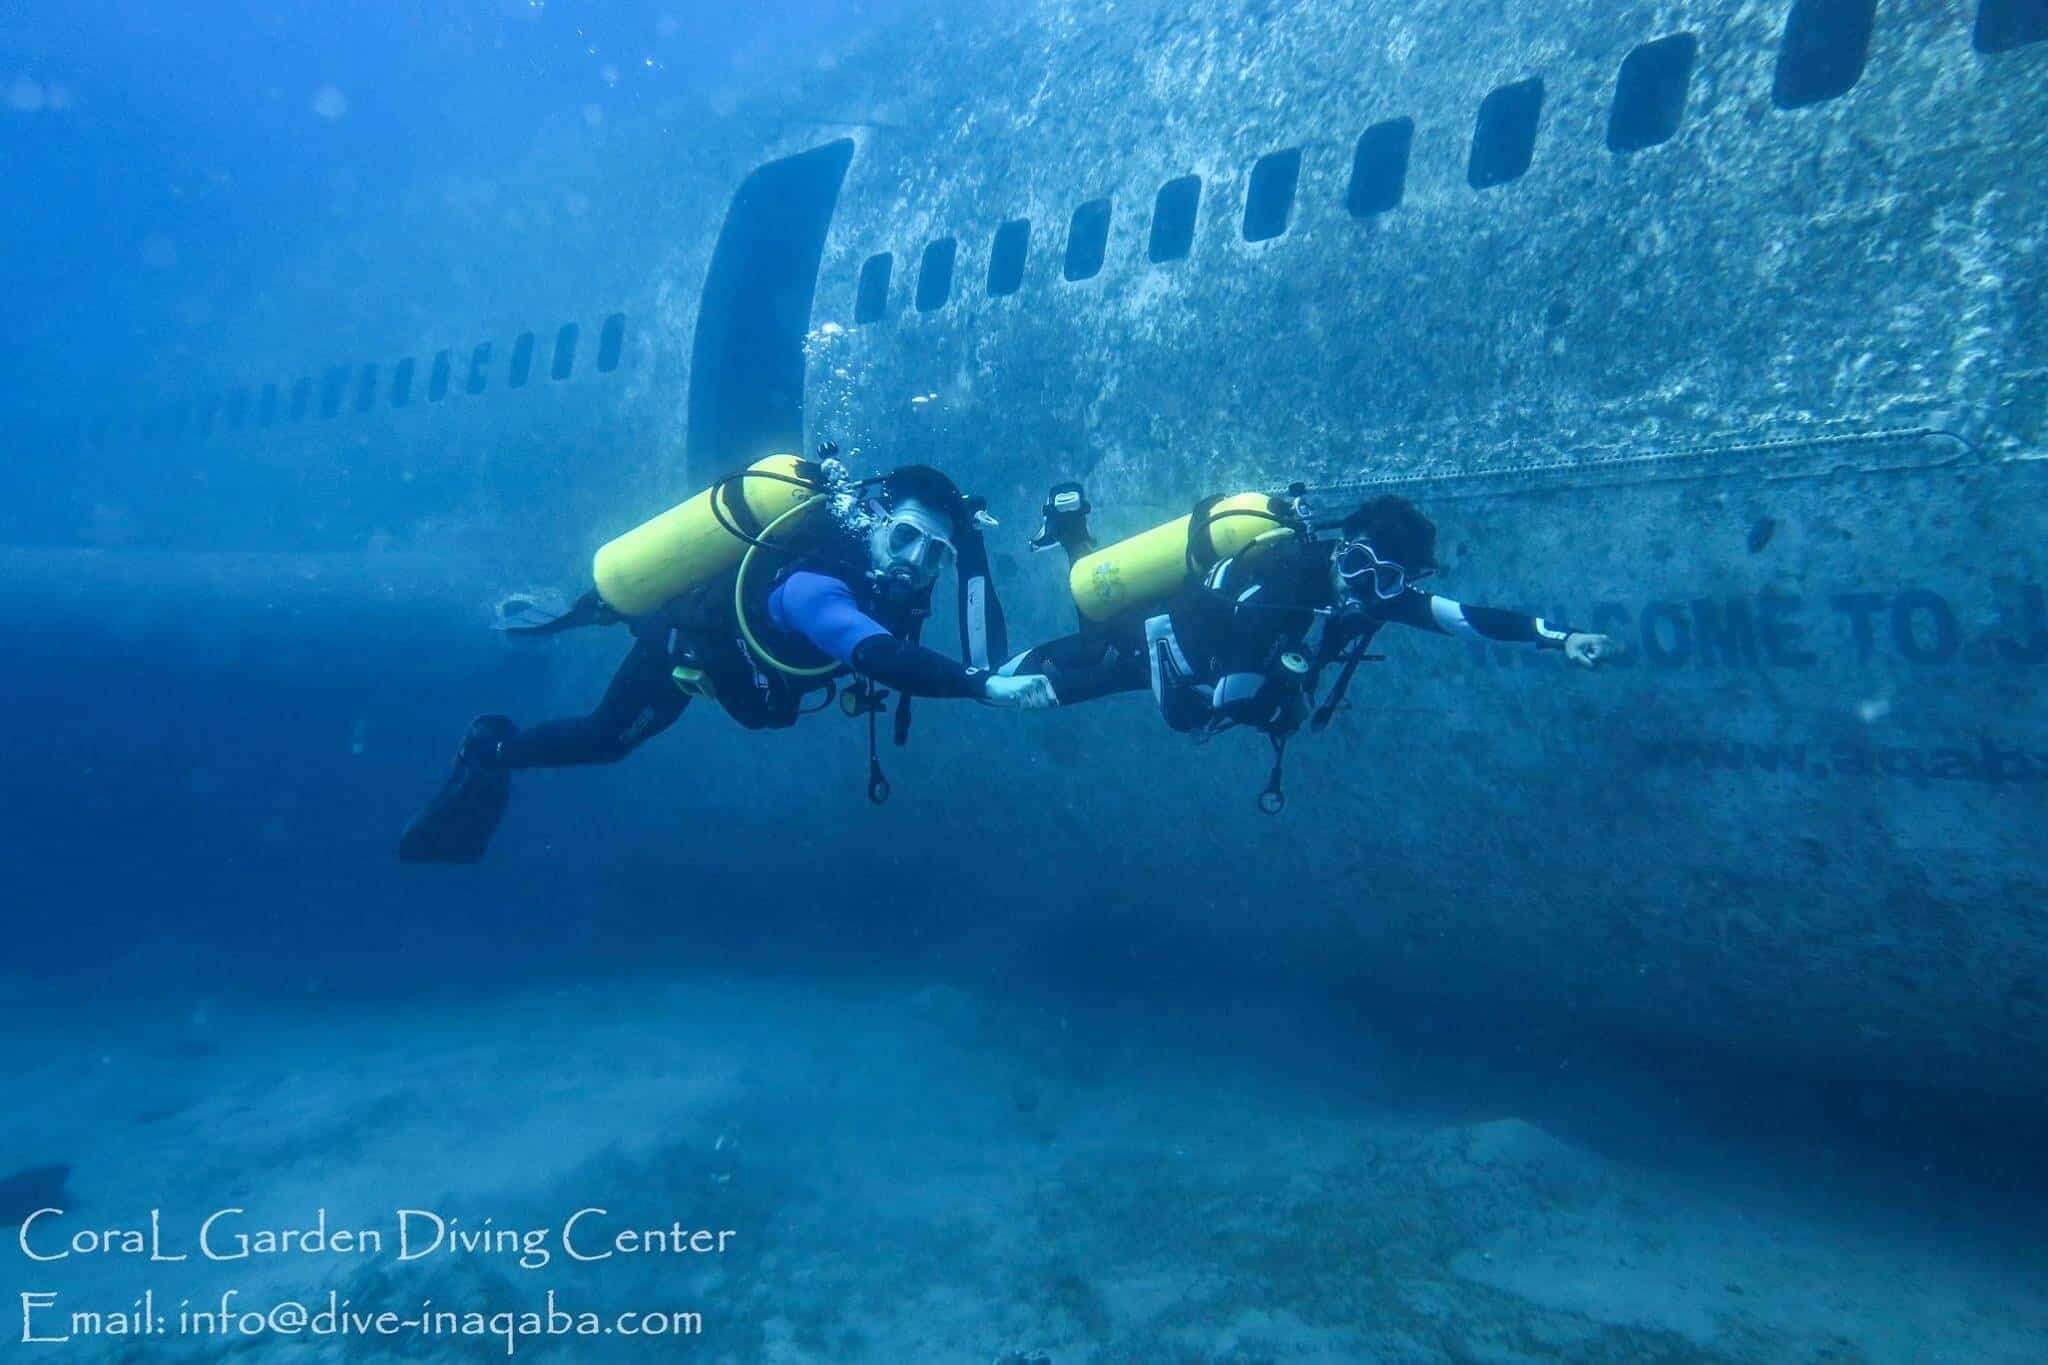 diver next the airplane